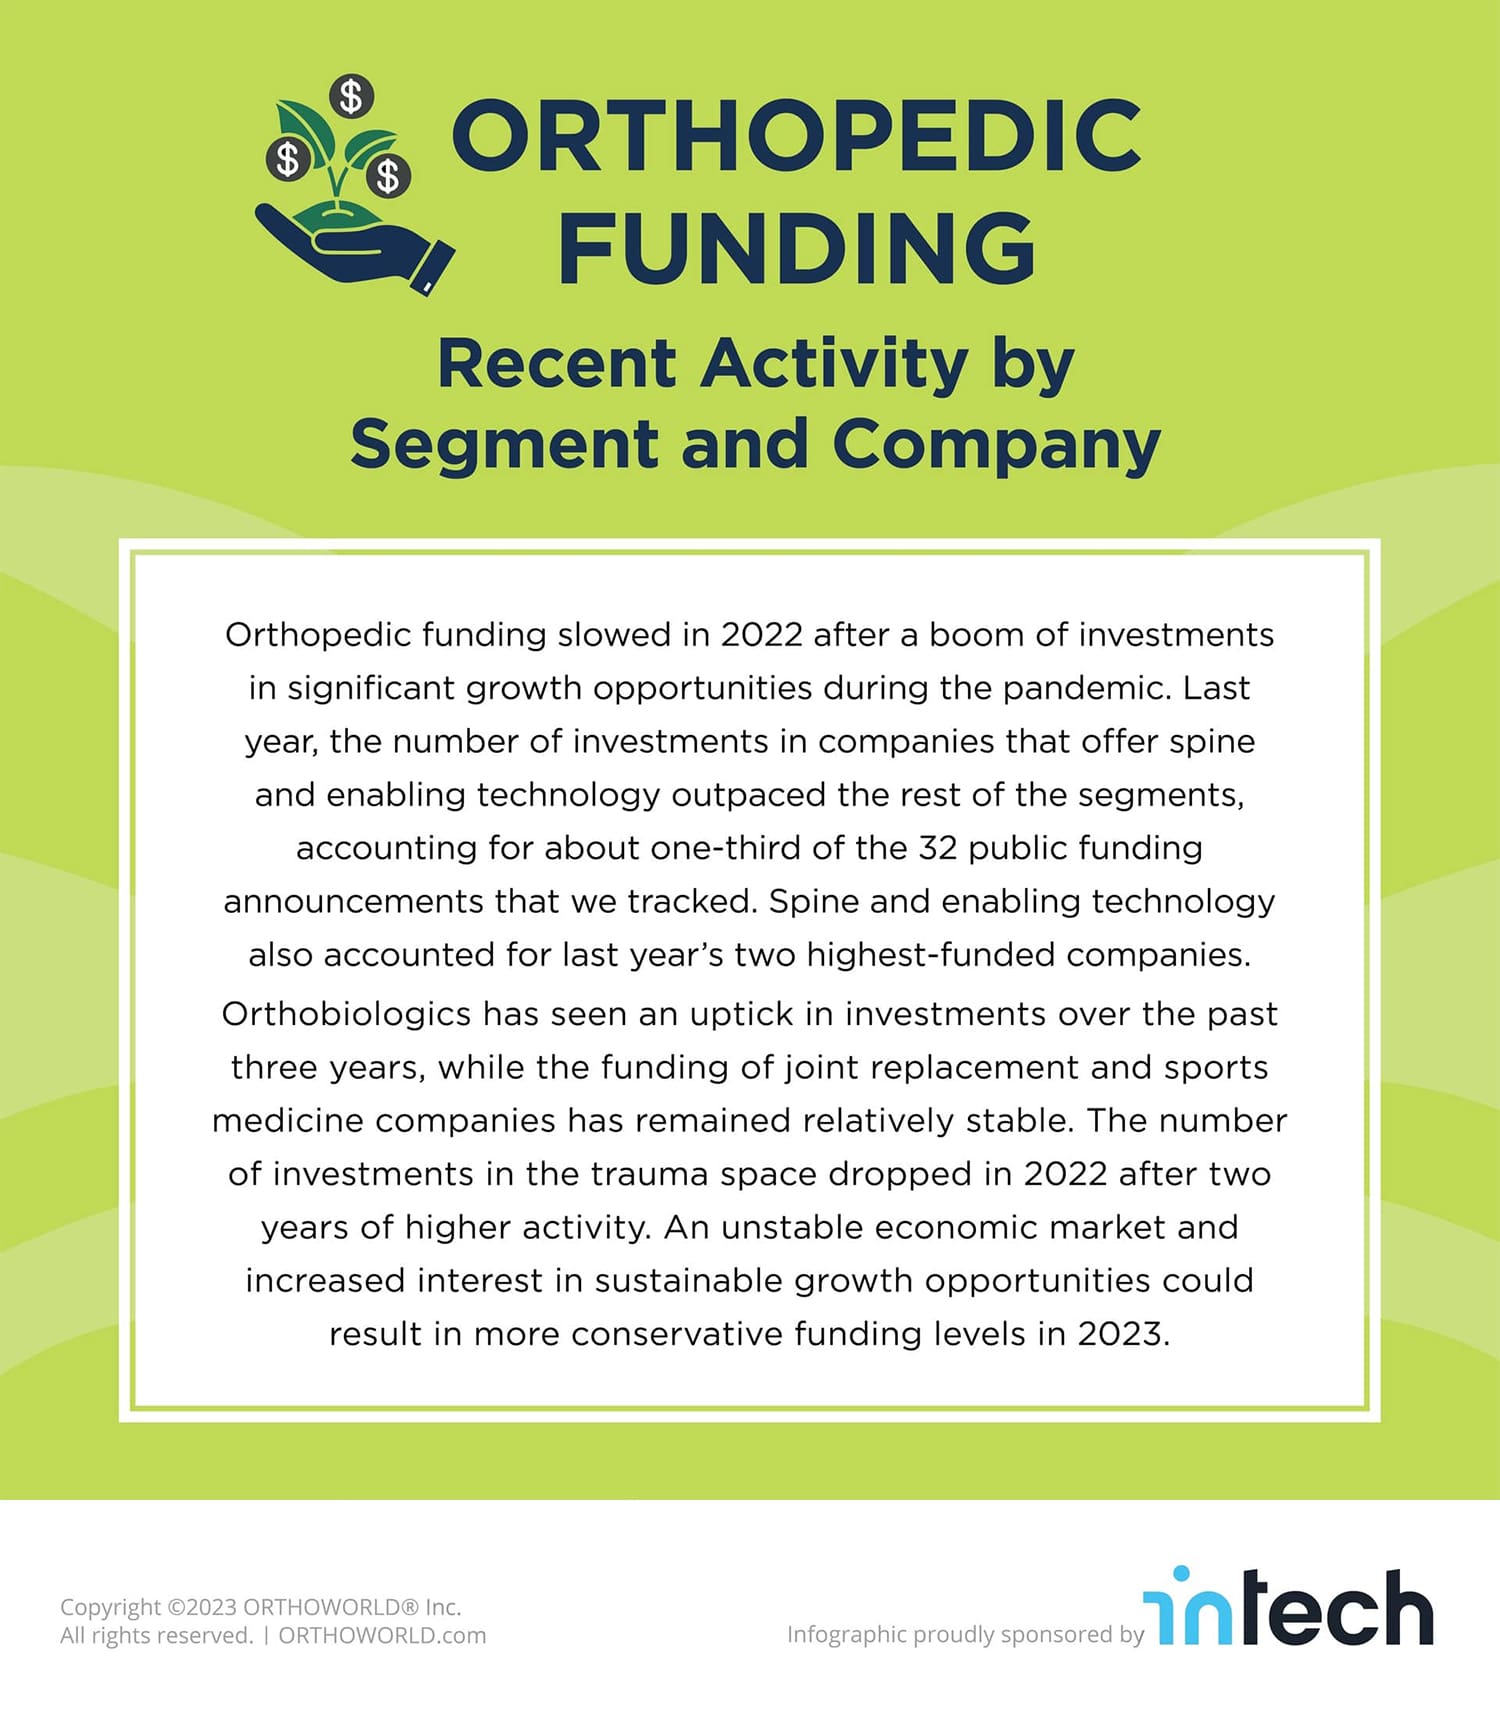 Orthopedic Funding by Segment and Company